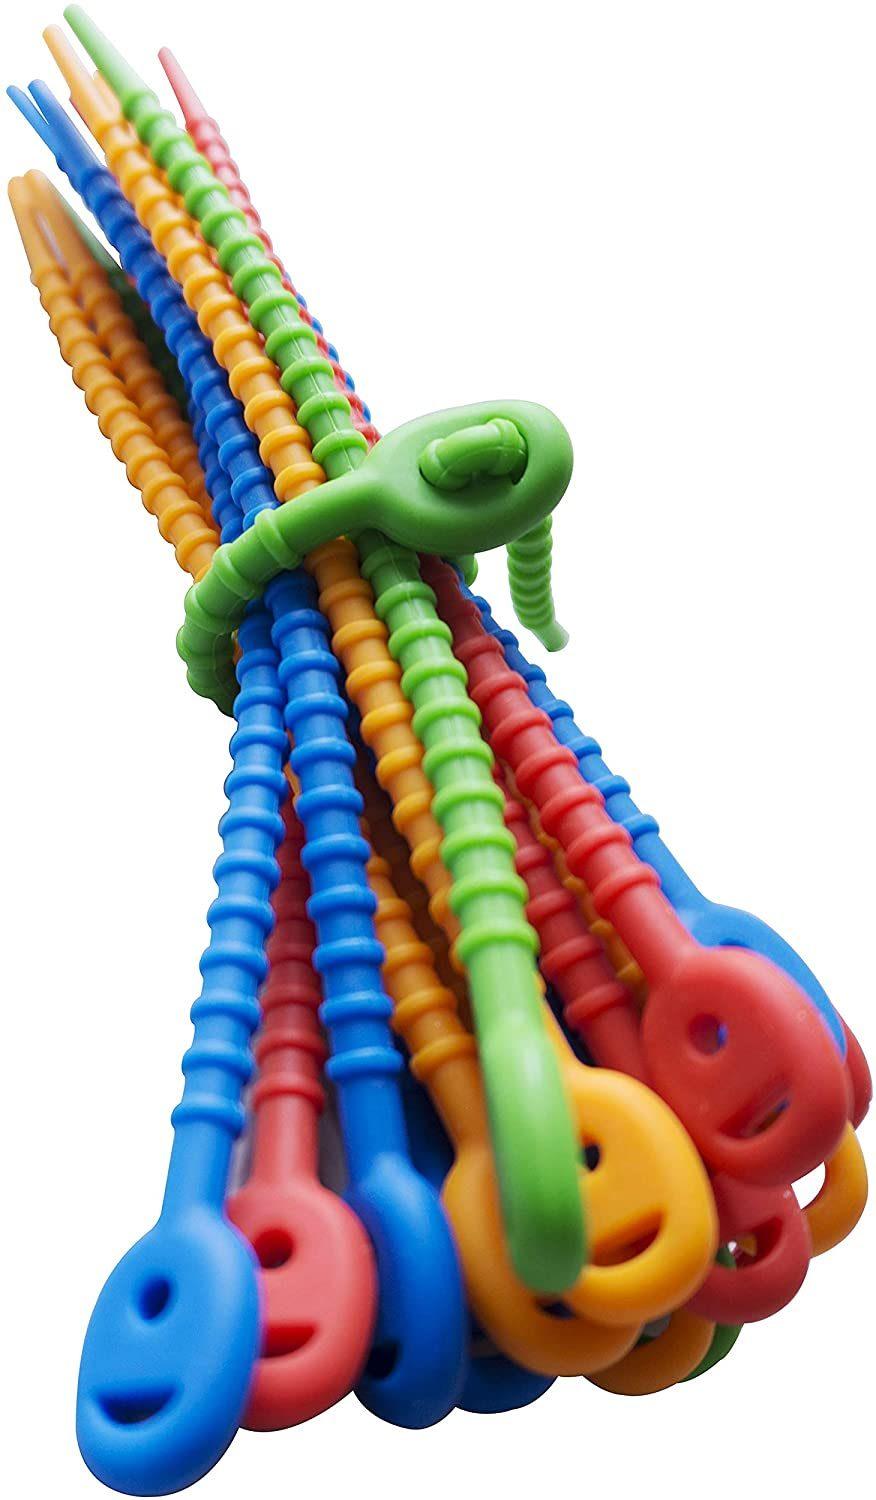 Colorful Silicone Ties Bag Clip Cable Straps Bread Tie Household Snake Ties Twist Tie